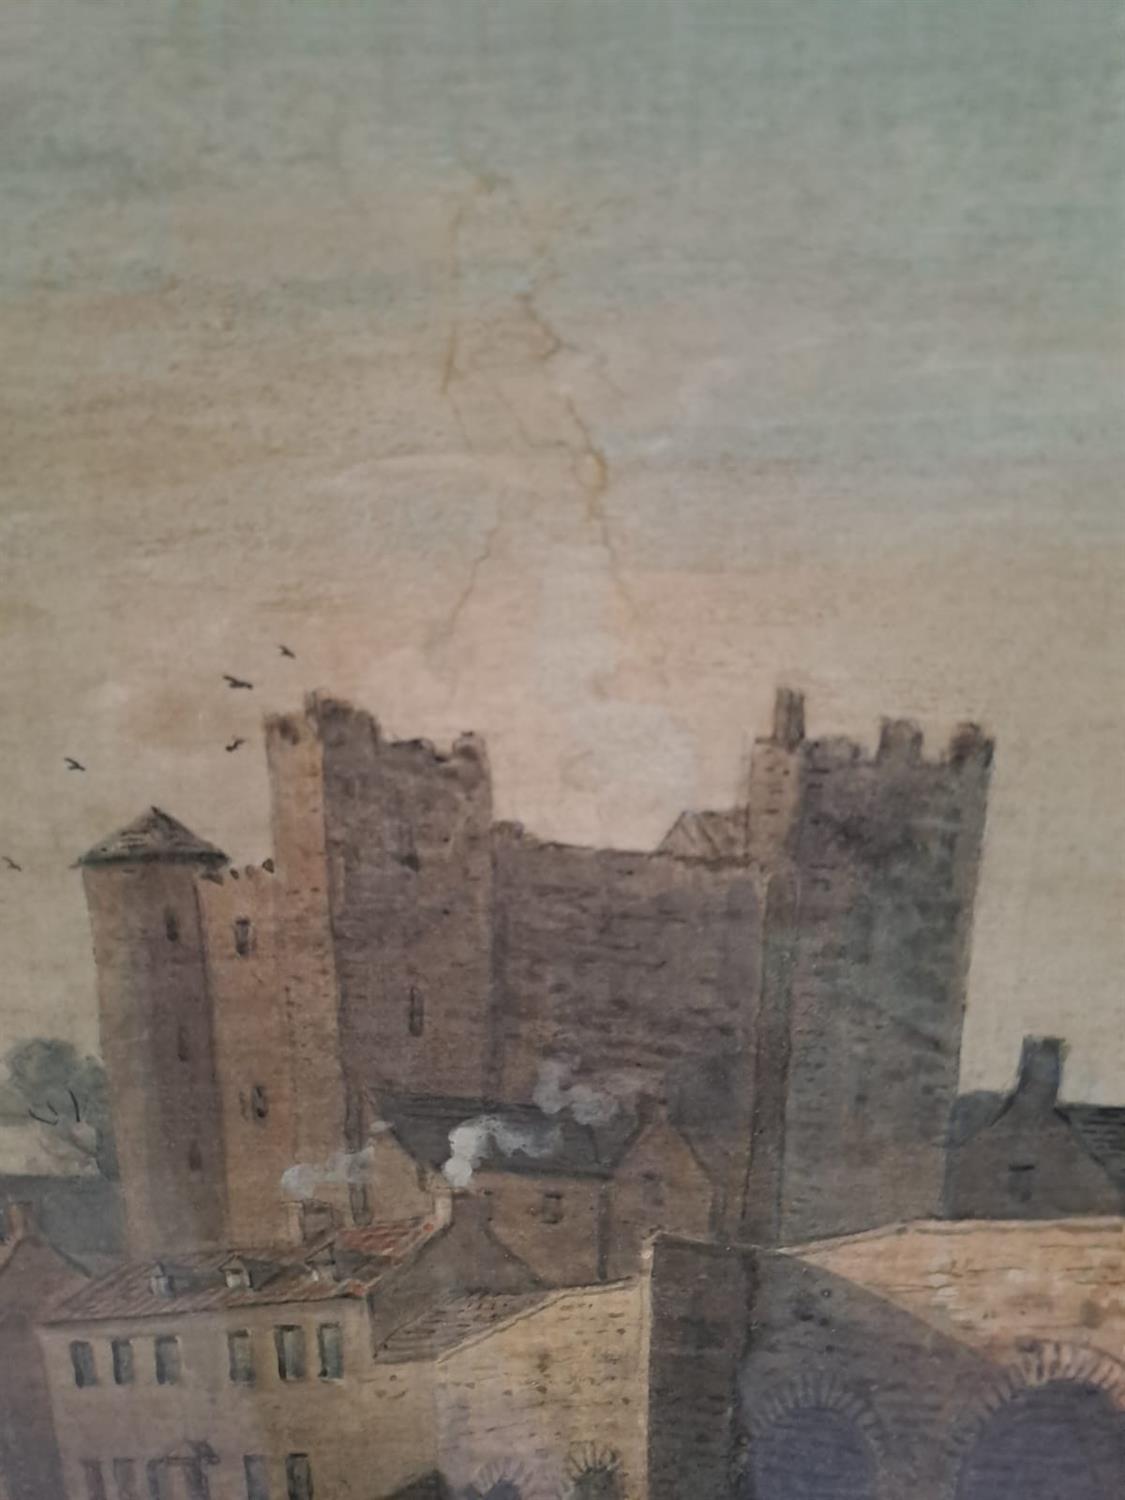 PAUL SANDBY RA (1731-1809) A View of the Castle and Bridge at Enniscorthy County Wexford, - Image 9 of 12